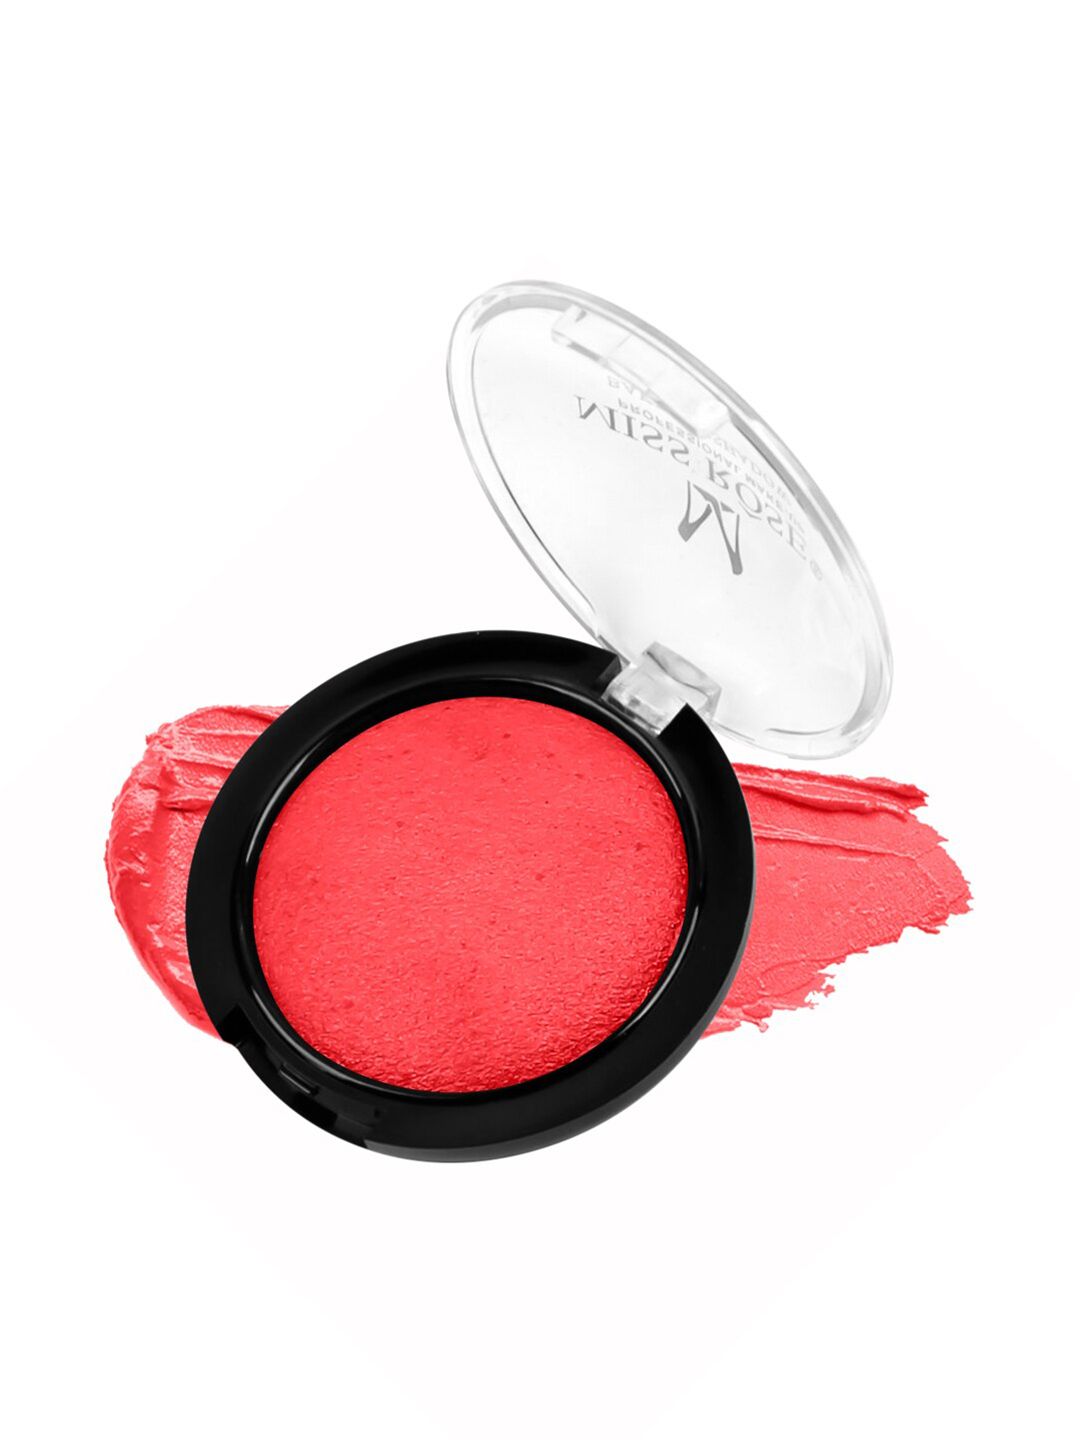 MISS ROSE Red Monochrome Baked Eyeshadow 7001-073M 26 Price in India